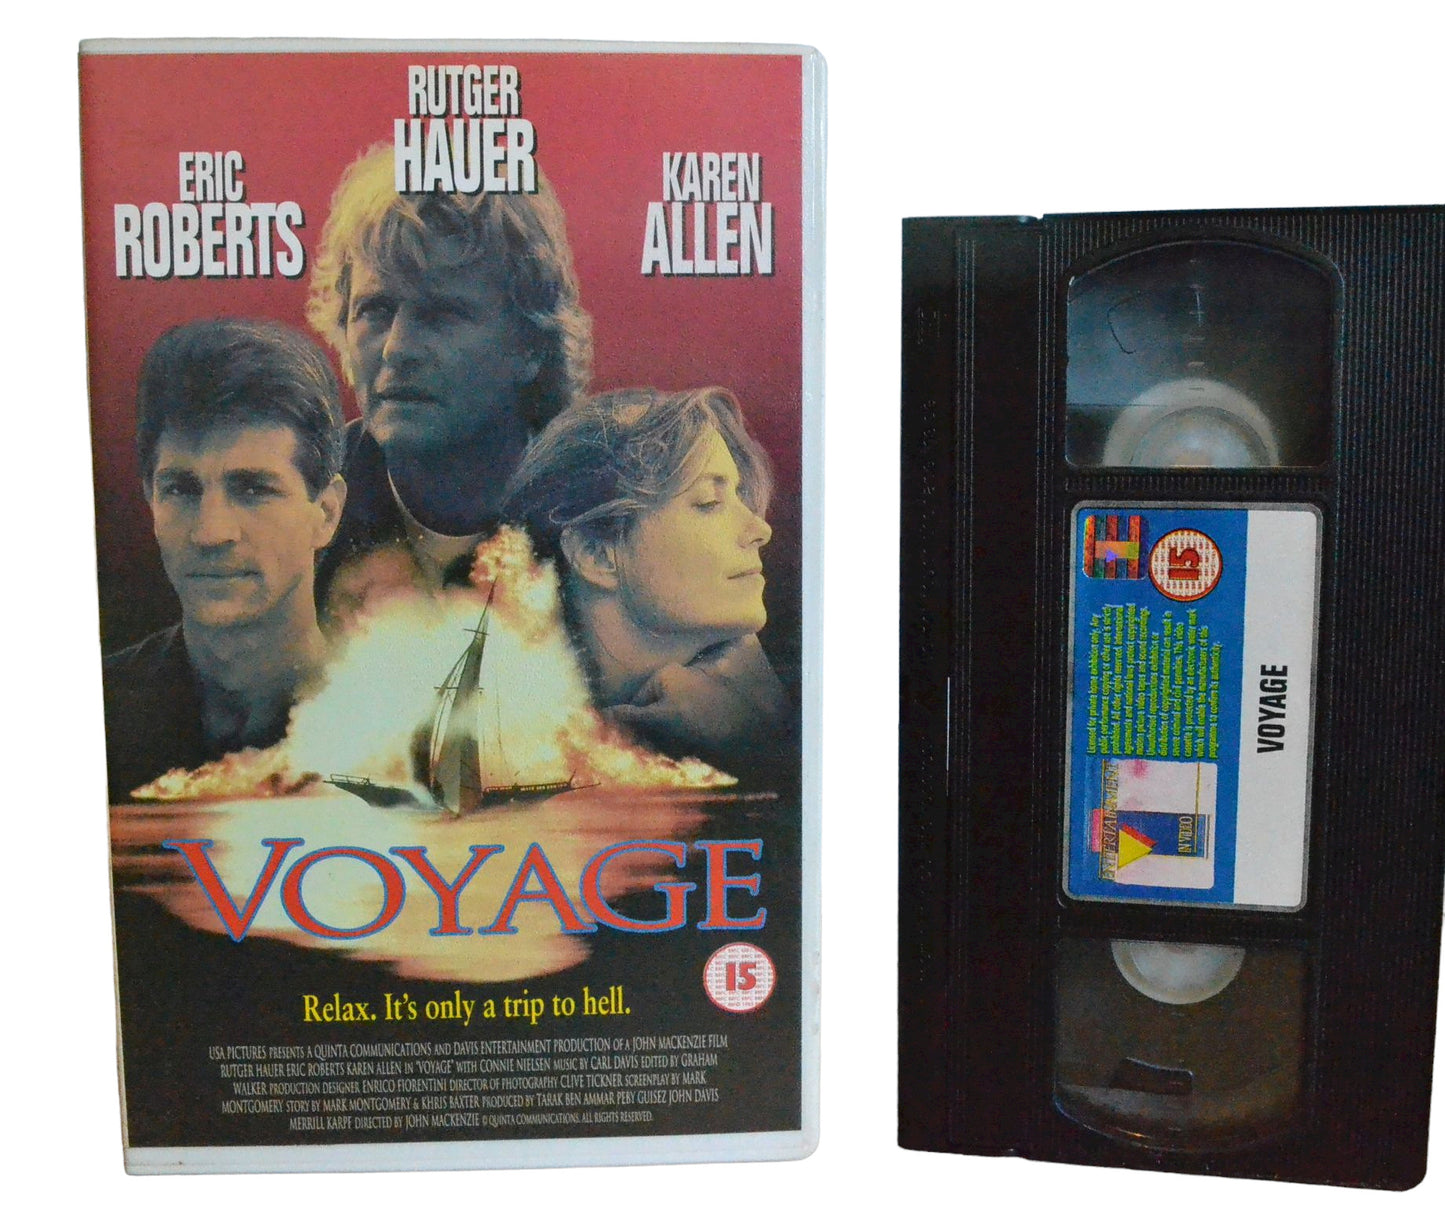 Voyage (Relax. It's Only A Trip To Hell) - Rutger Hauer - Entertainment in Video - Thriller - Large Box - Pal VHS-